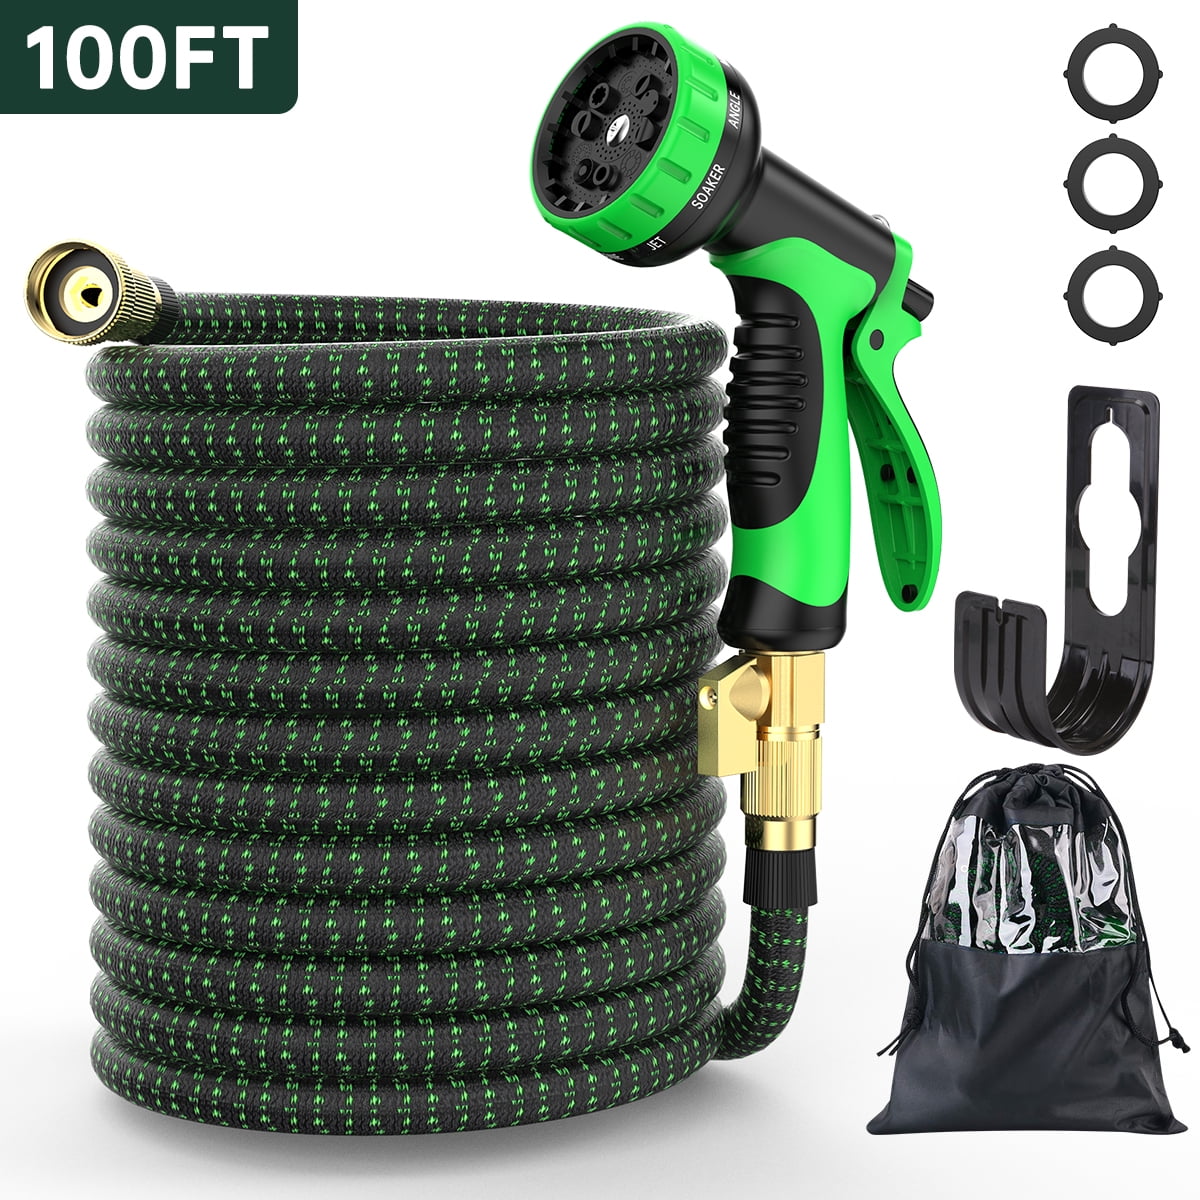 100FT Expandable Garden Hose,Upgraded Leakproof Lightweight Flexible Water Hose 